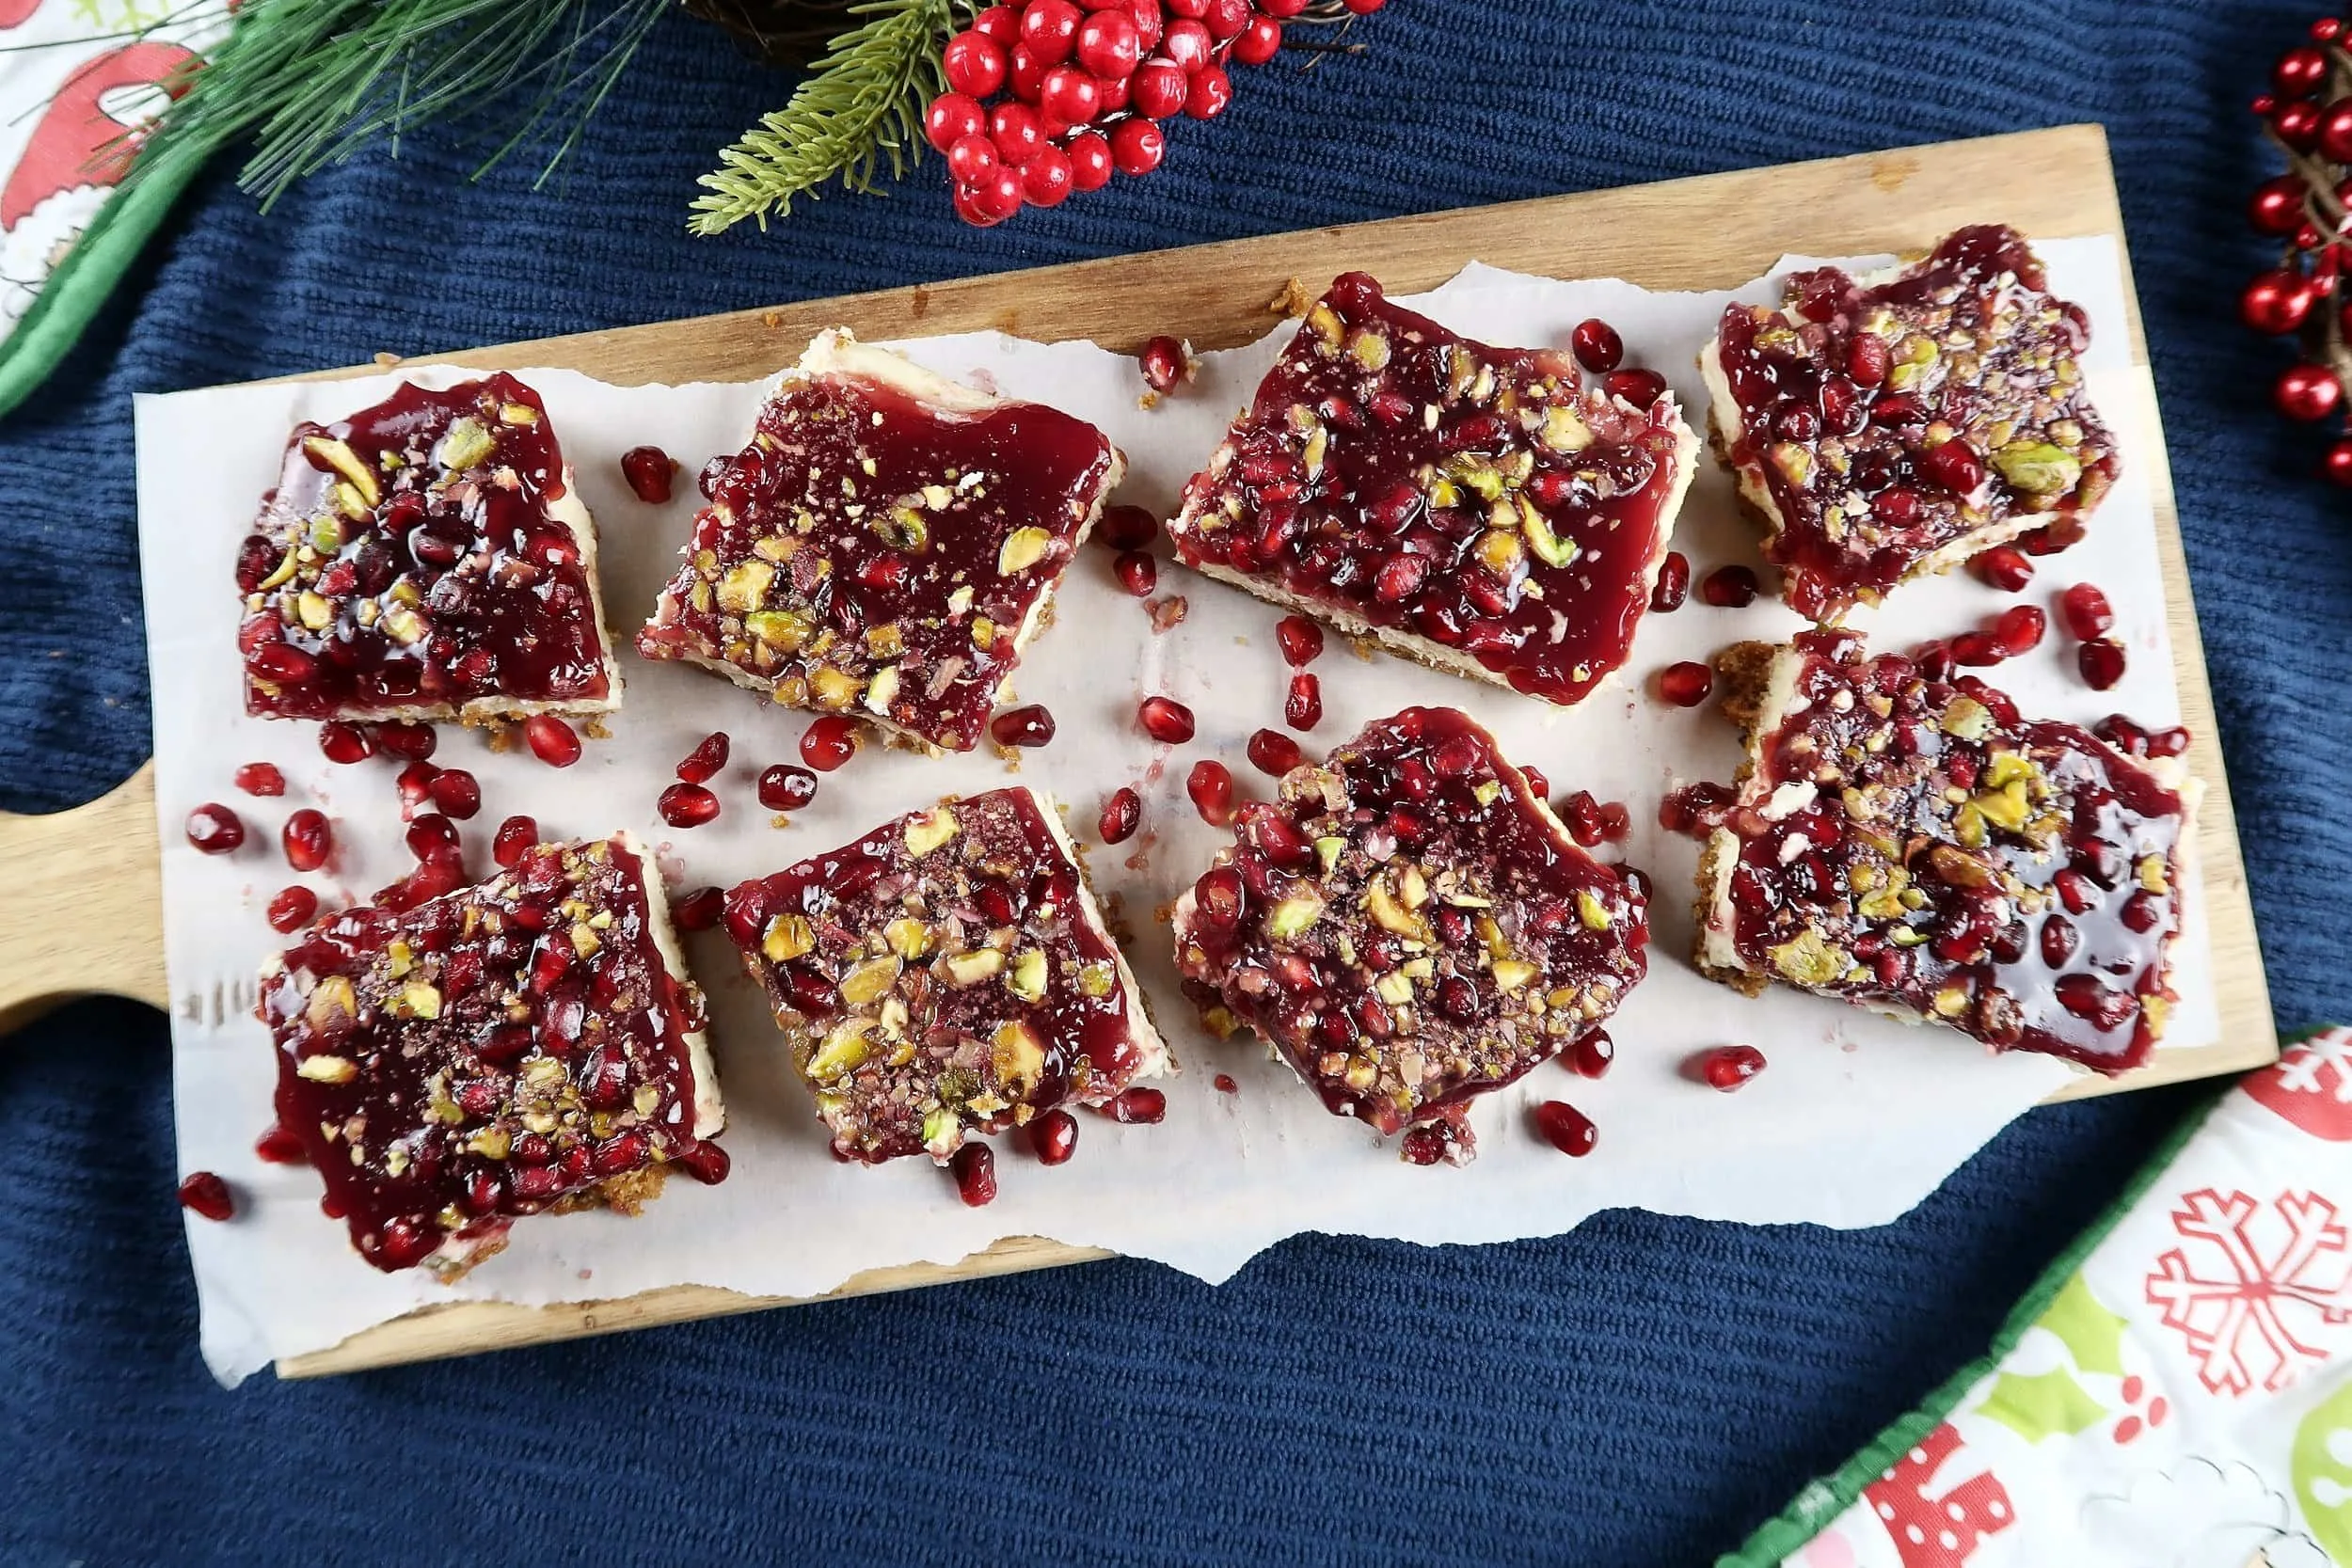 Pomegranate Pistachio Cheesecake Bars cut into squares and served on a cutting board